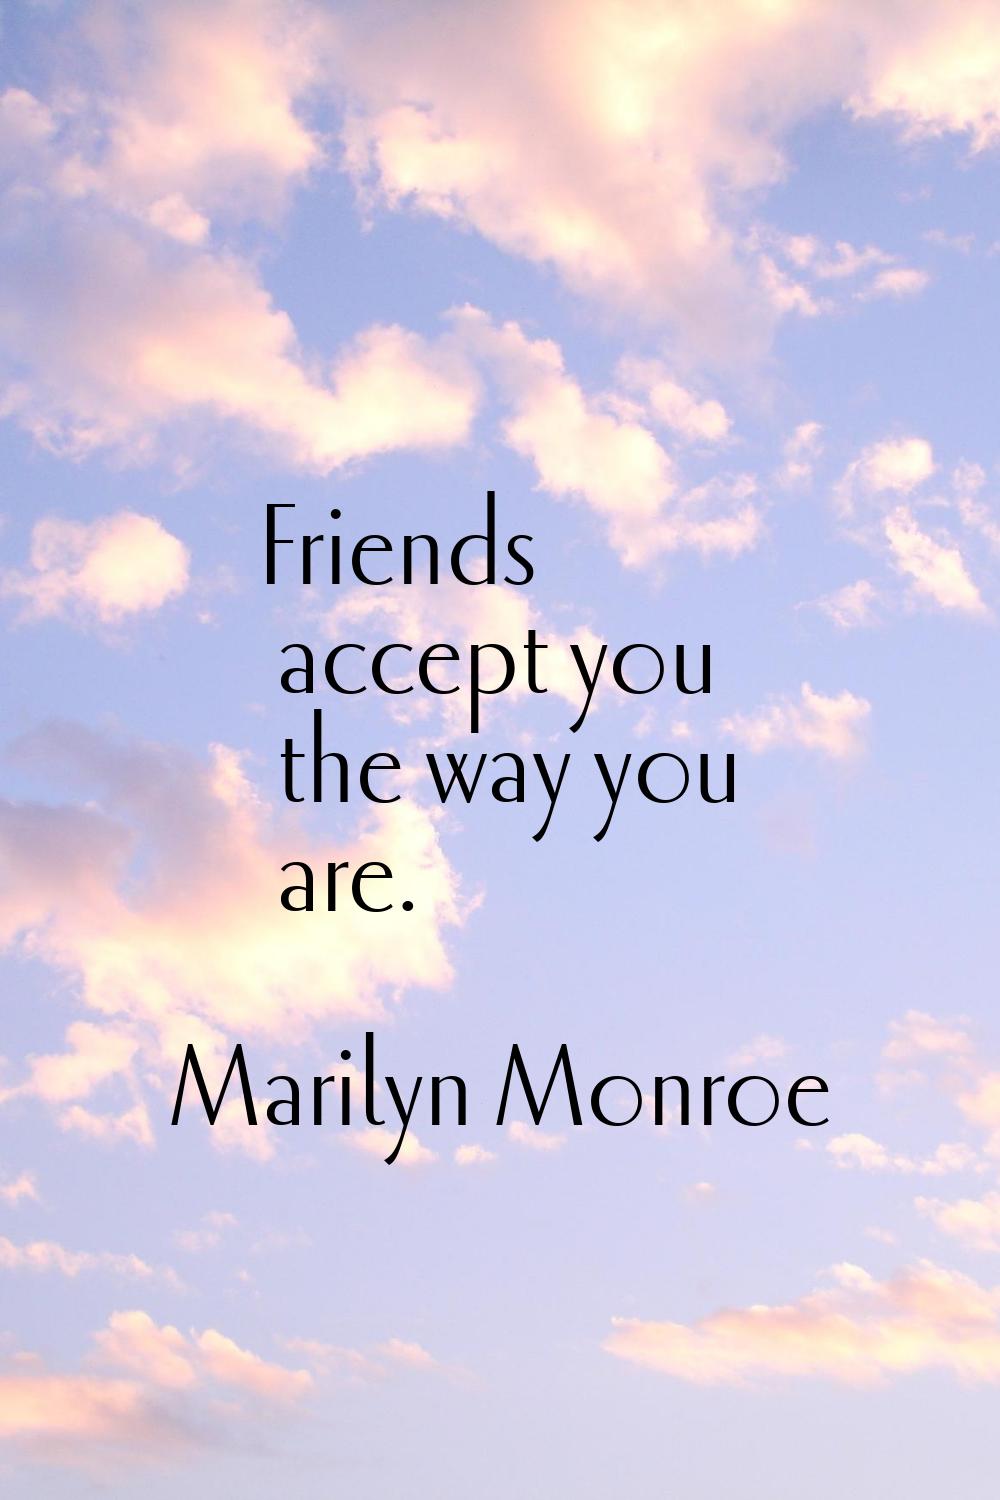 Friends accept you the way you are.